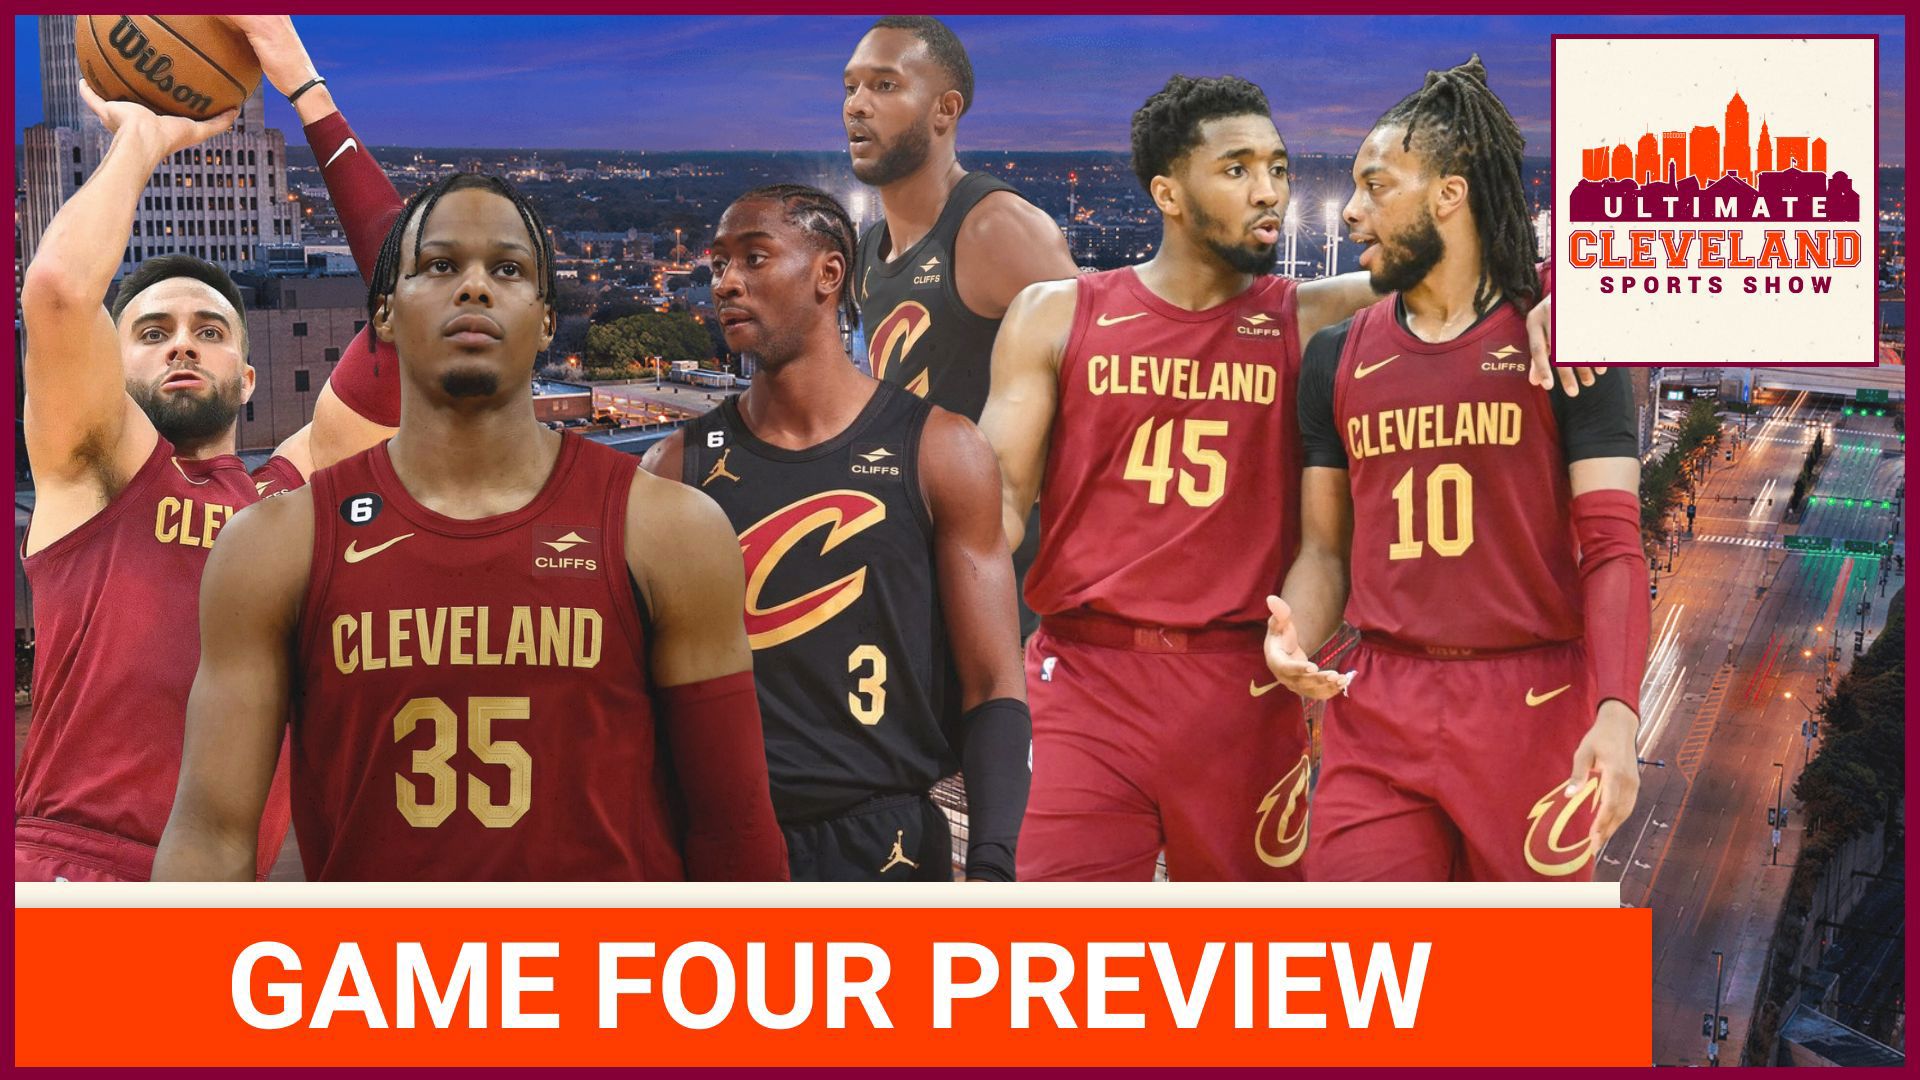 UCSS previews Game Four: Cavs vs. Magic on Saturday afternoon